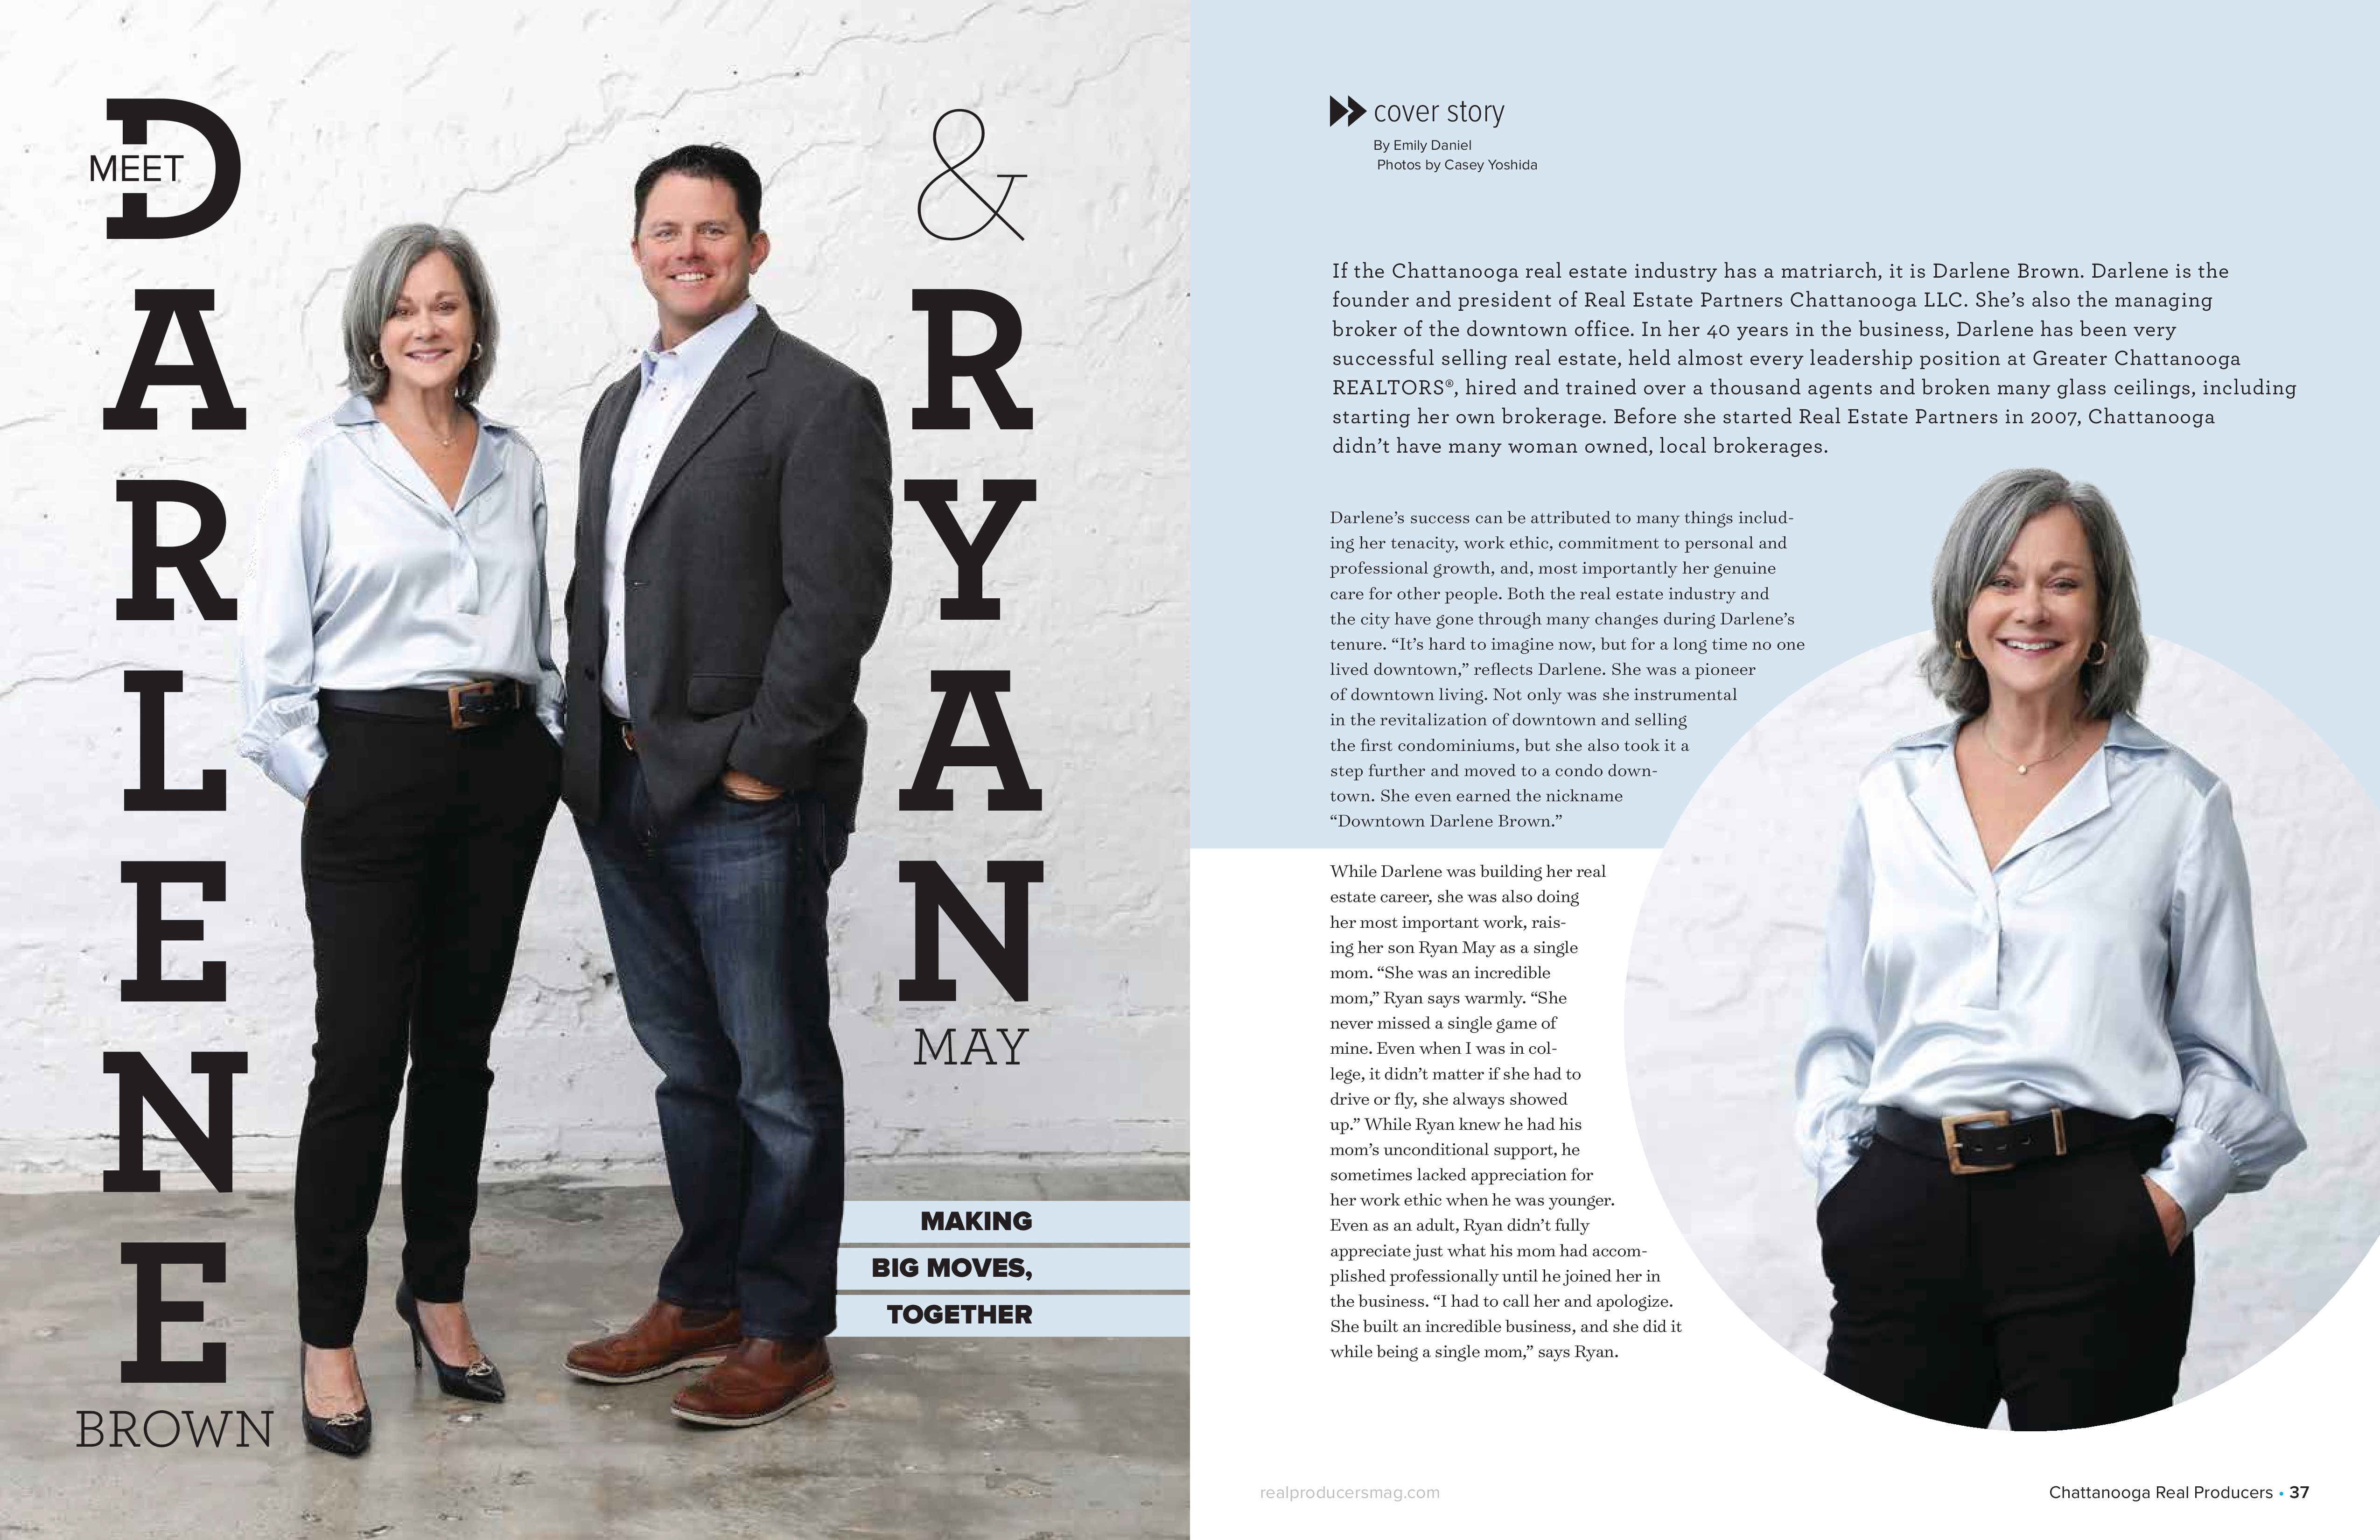 Preview image of Darlene and Ryan: Chattanooga Real Producer's May 2024 Cover Story